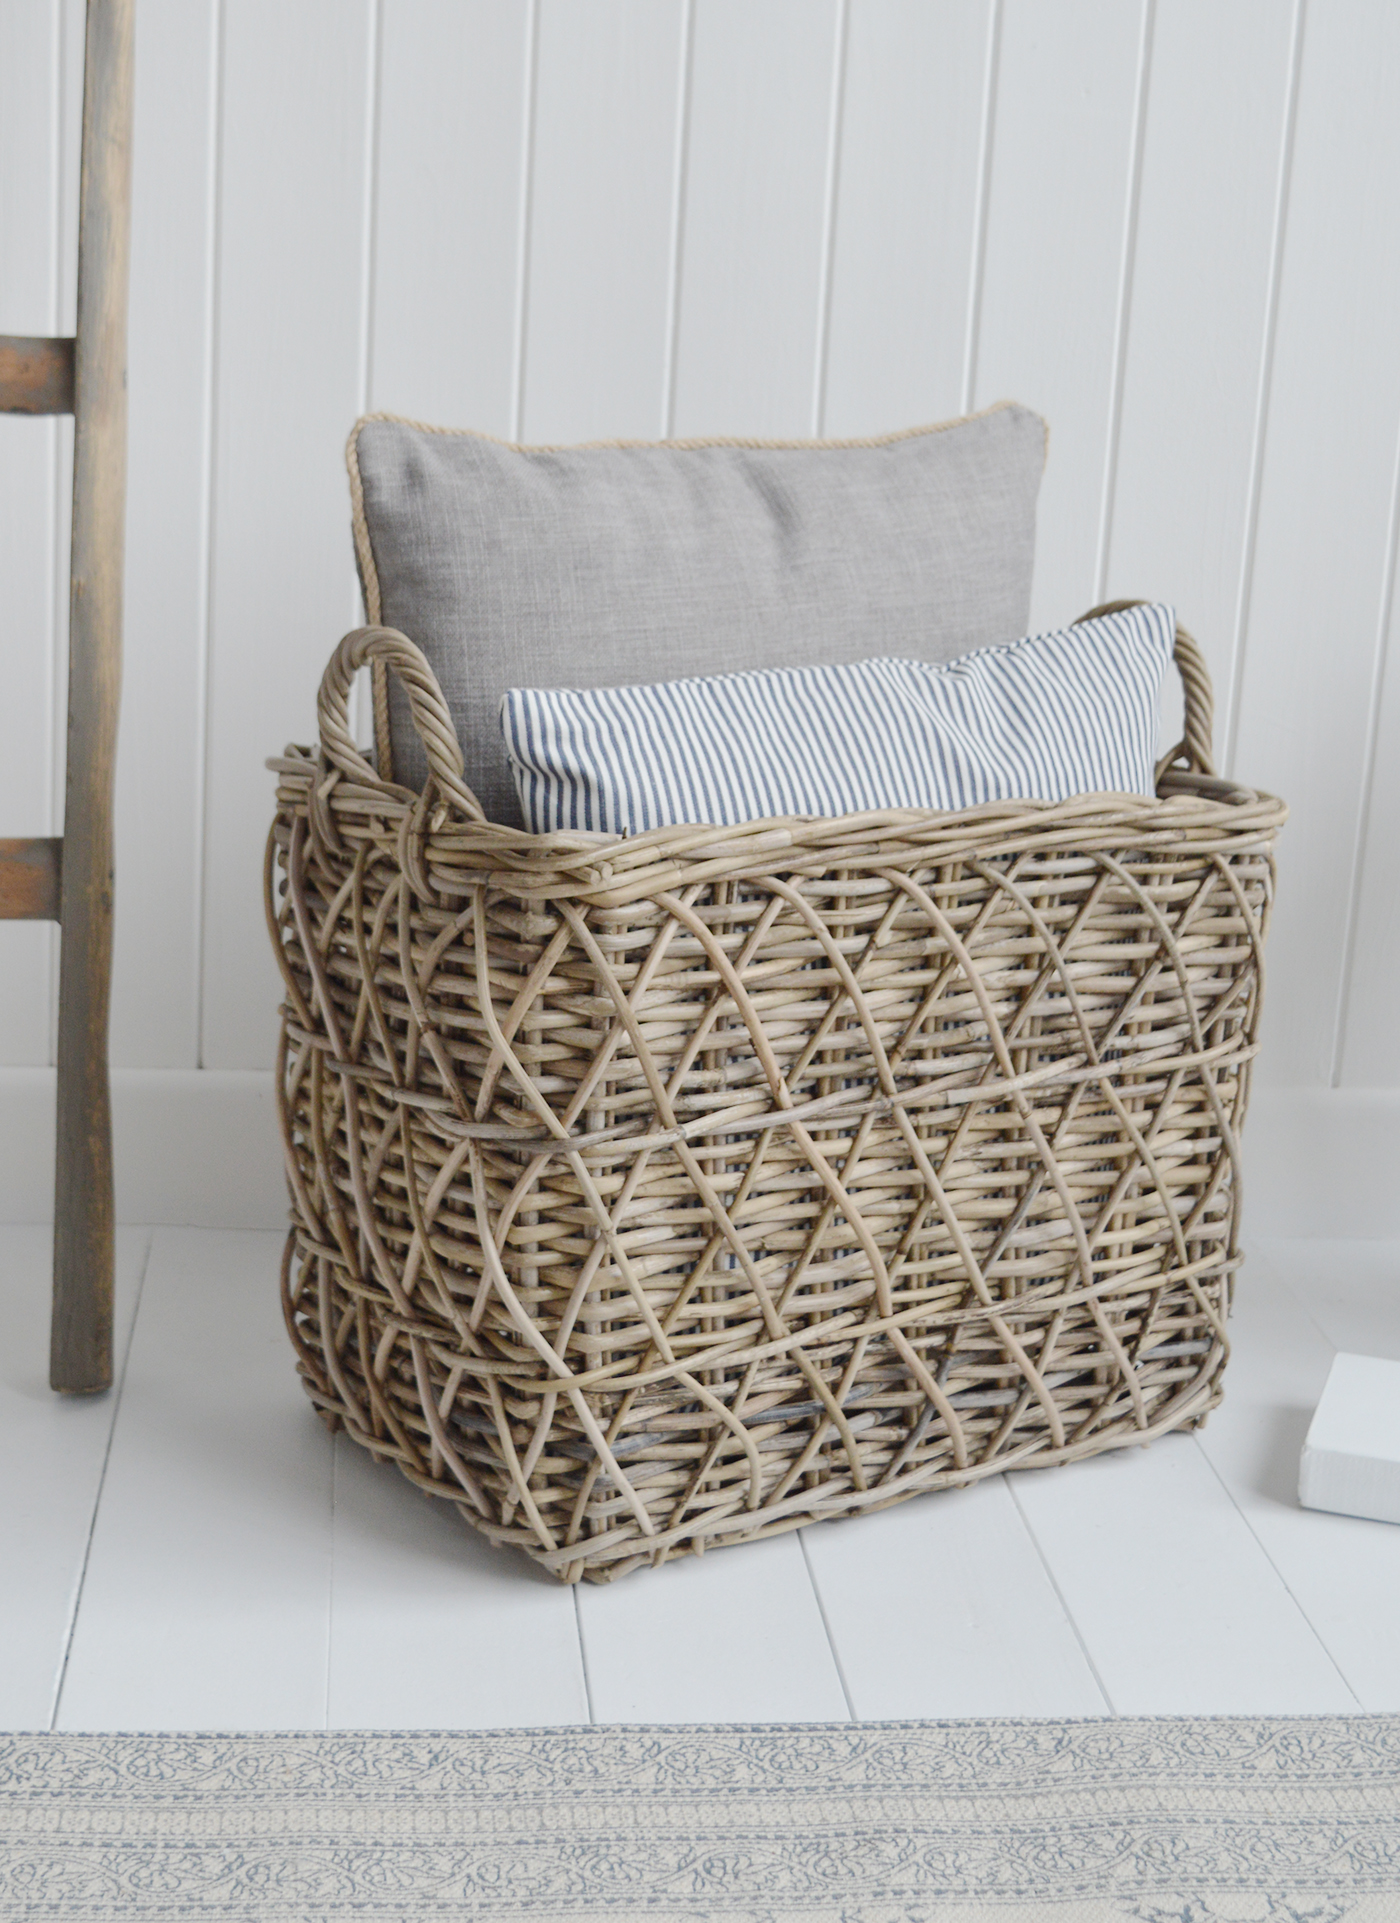 Casco Bay grey tall willow grey basket with handles for logs, toys and everyday storage from The White Lighthouse Furniture and Home Interiors for New England, country, coastal and city homes for hallway, living room, bedroom and bathroom